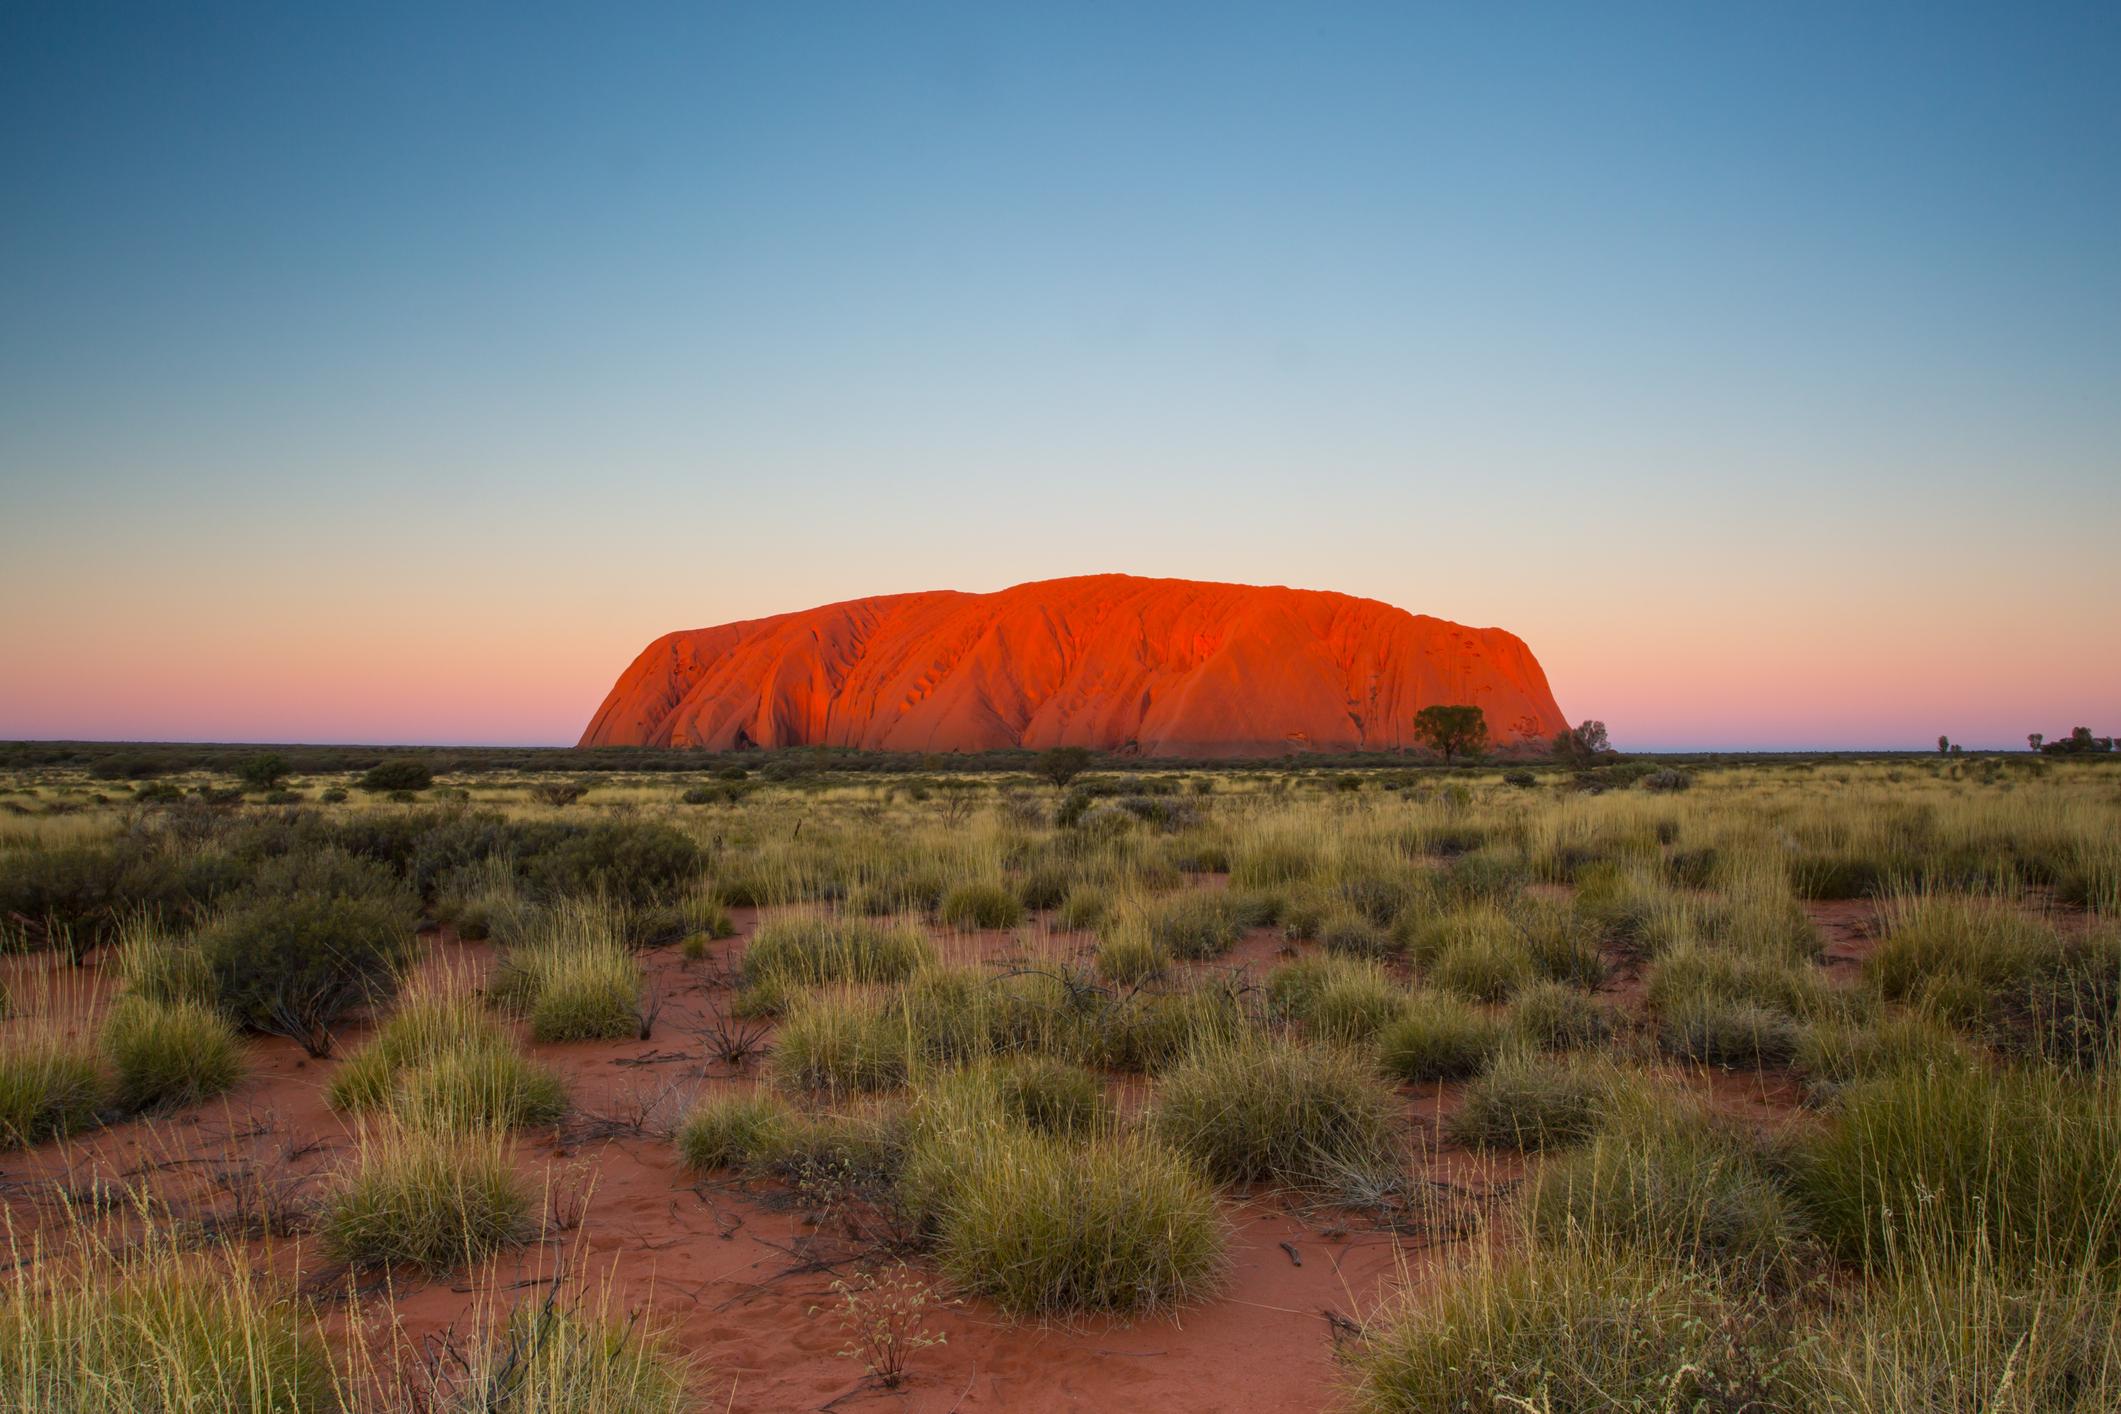 The area around Uluru is home to hot spring, waterholes, rock caves and ancient paintings